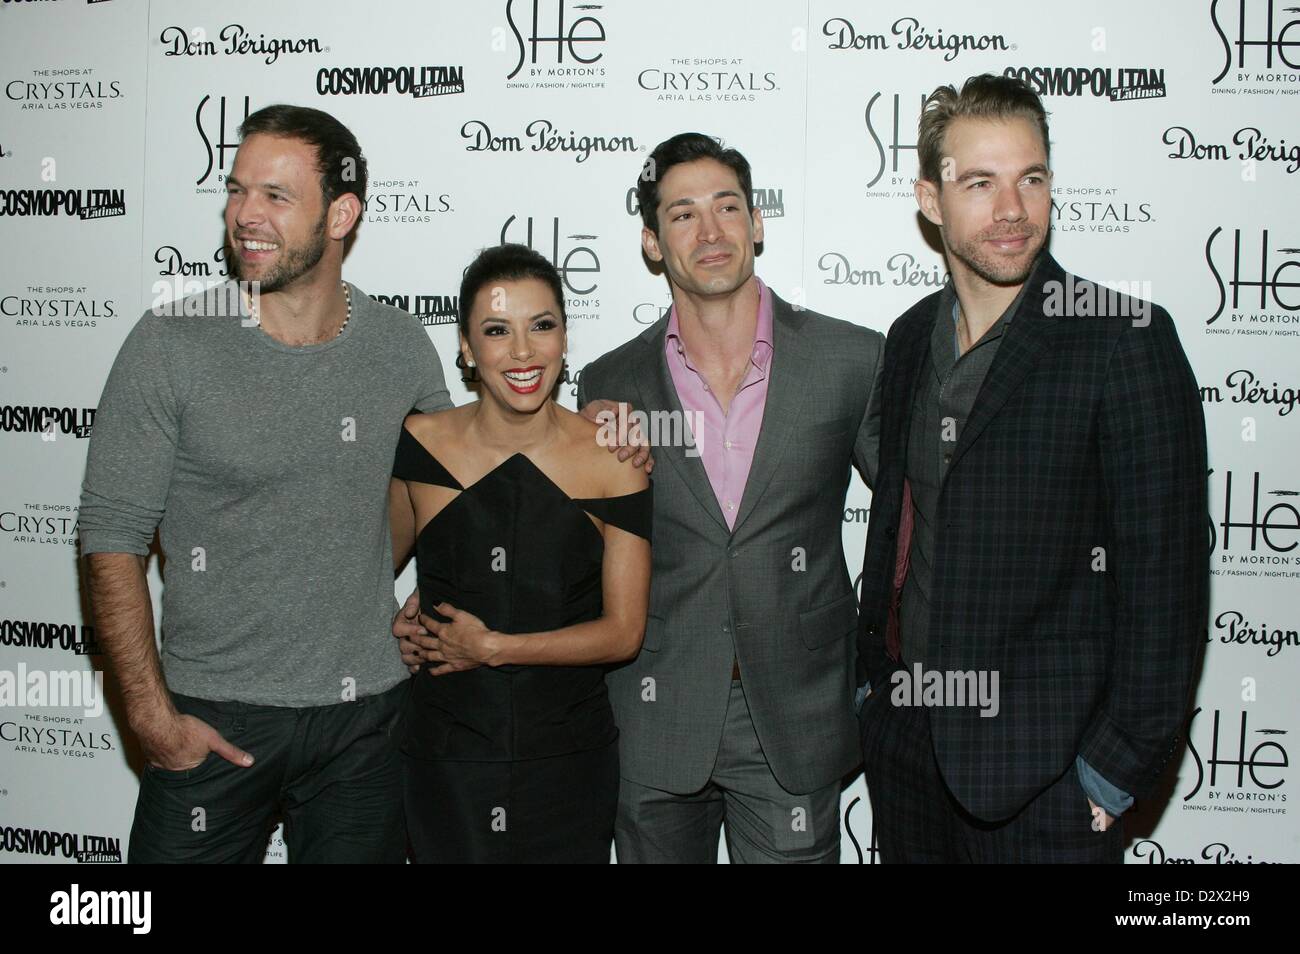 aflevere Mundskyl Hvile Ernesto Arguello, Eva Longoria, Ben Patton, Tim Lopez at arrivals for Grand  Opening of SHe by Morton's Restaurant, Crystals at CityCenter, Las Vegas,  NV February 2, 2013. Photo By: James Atoa/Everett Collection/Alamy